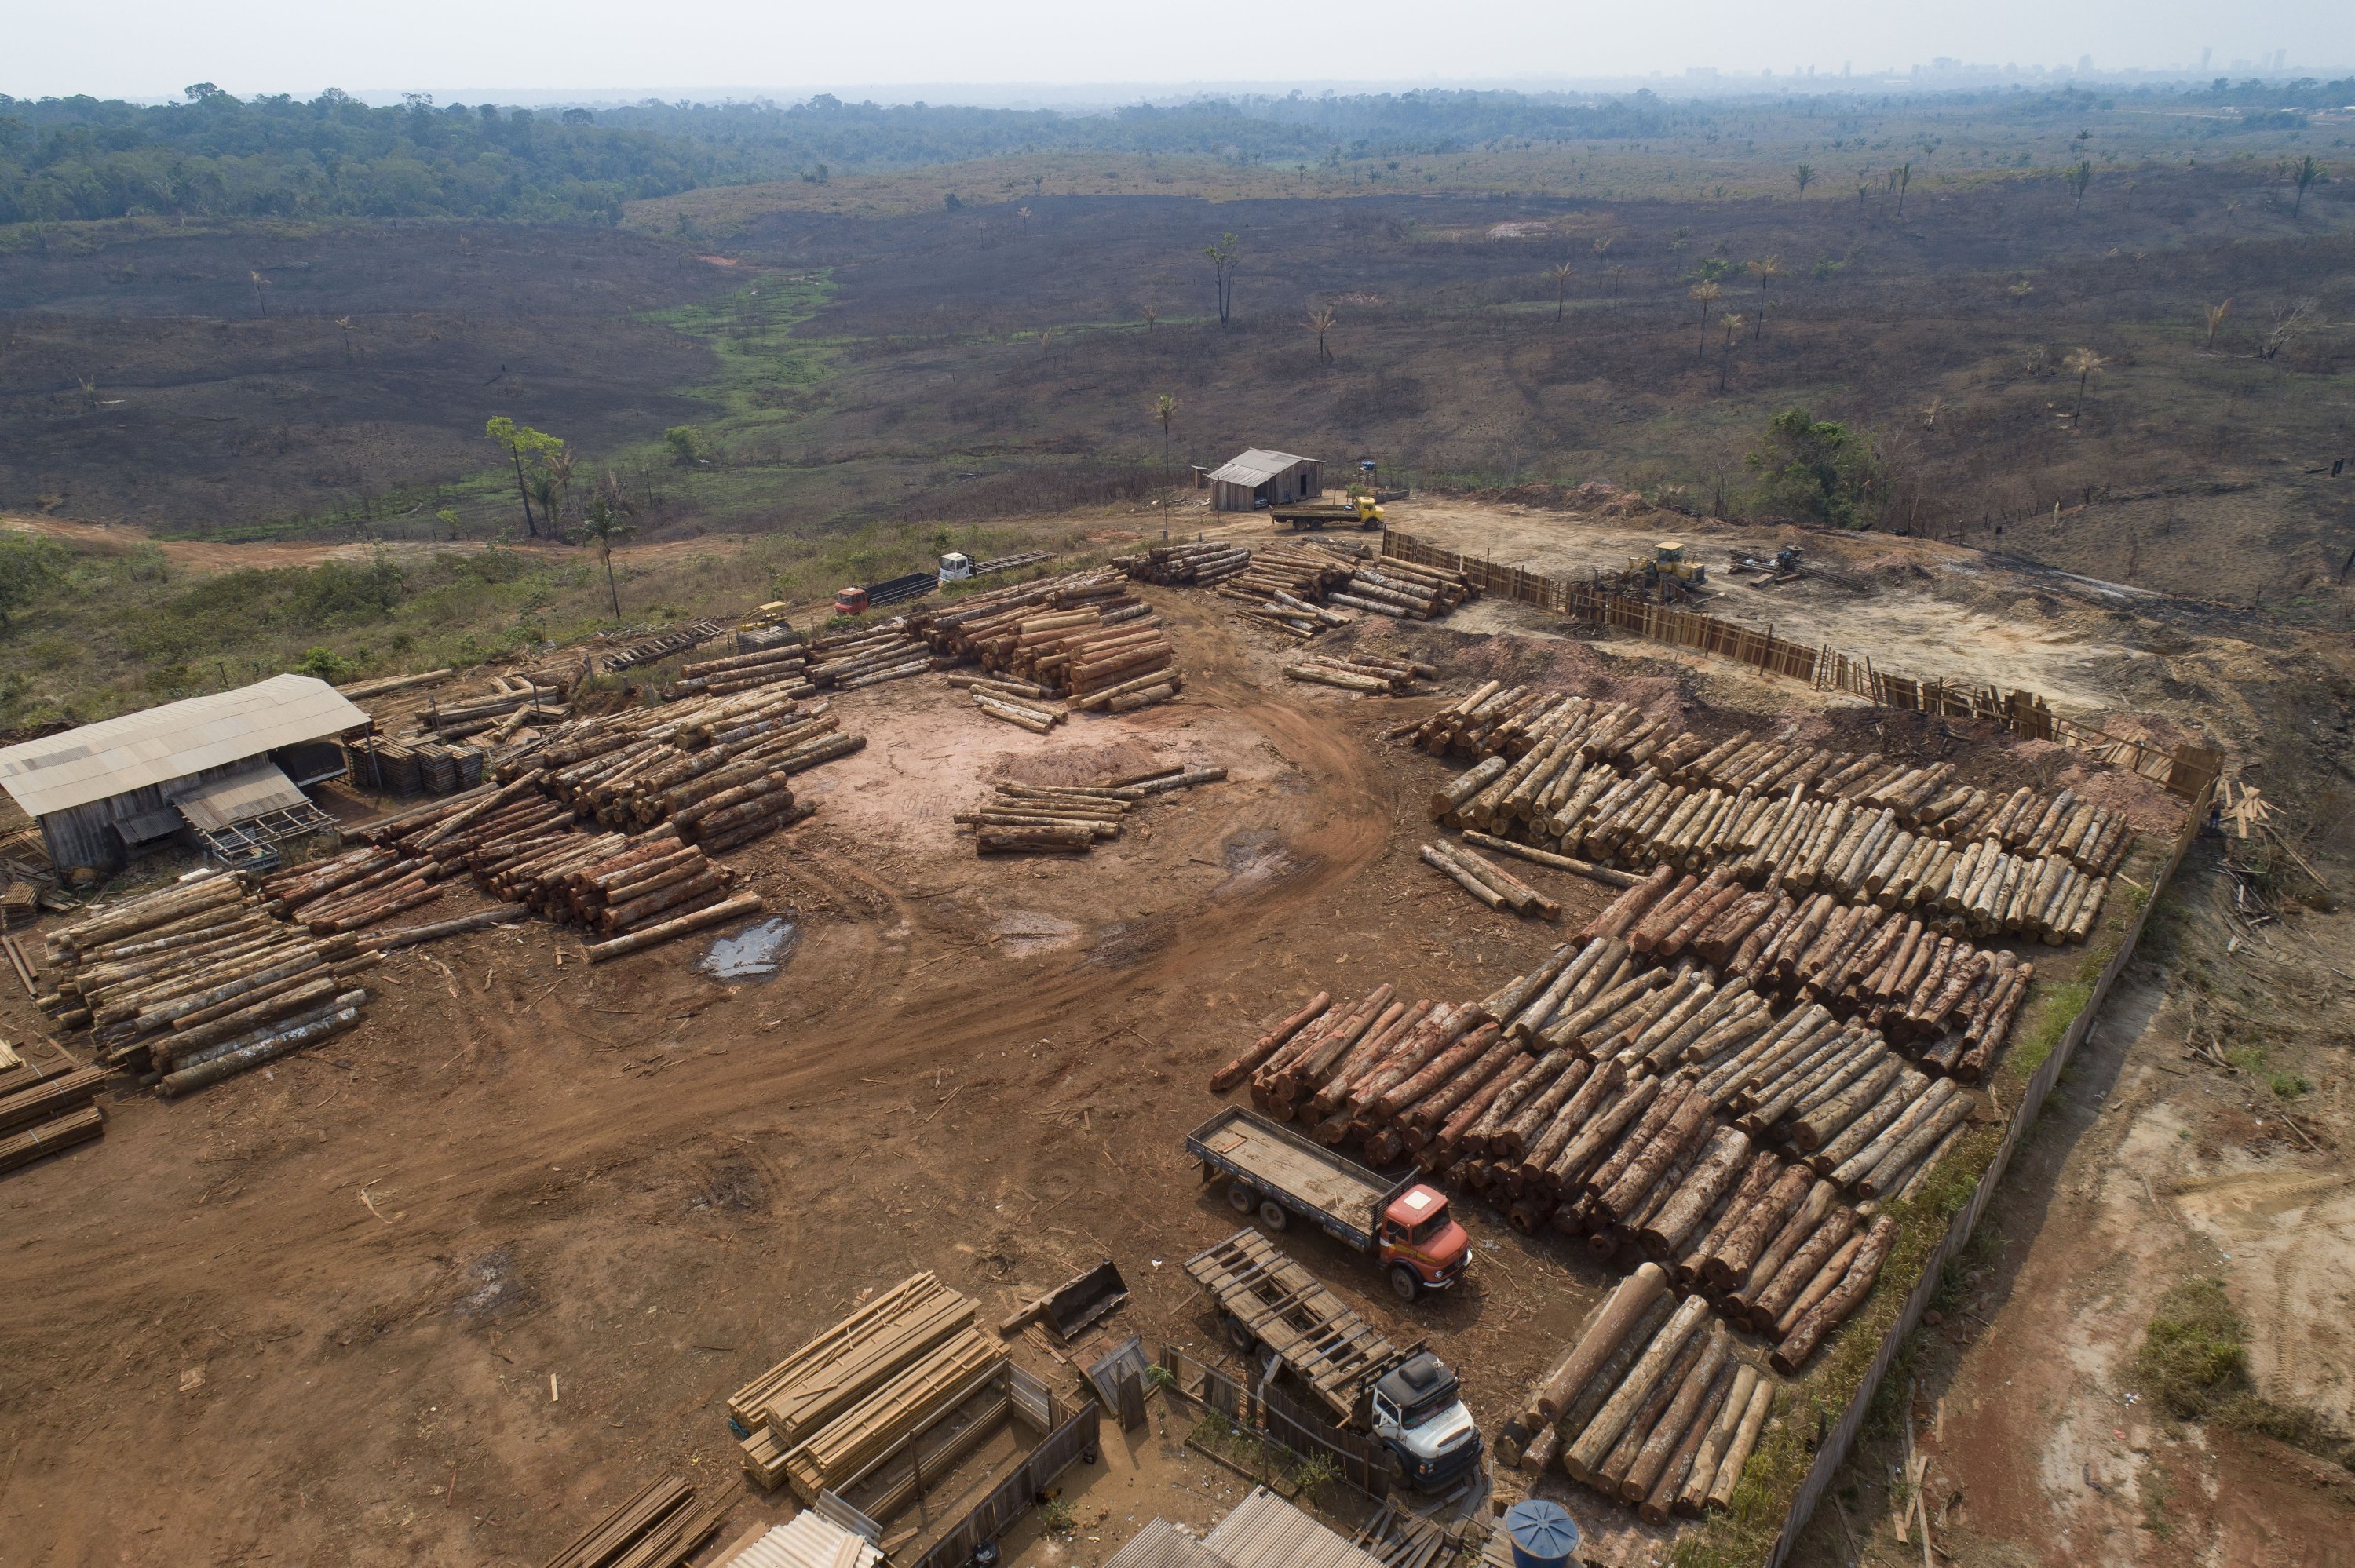 Logs are stacked at a lumber mill surrounded by recently charred and deforested fields near Porto Velho, Rondonia state, Brazil, Sep. 2, 2019. (AP Photo)